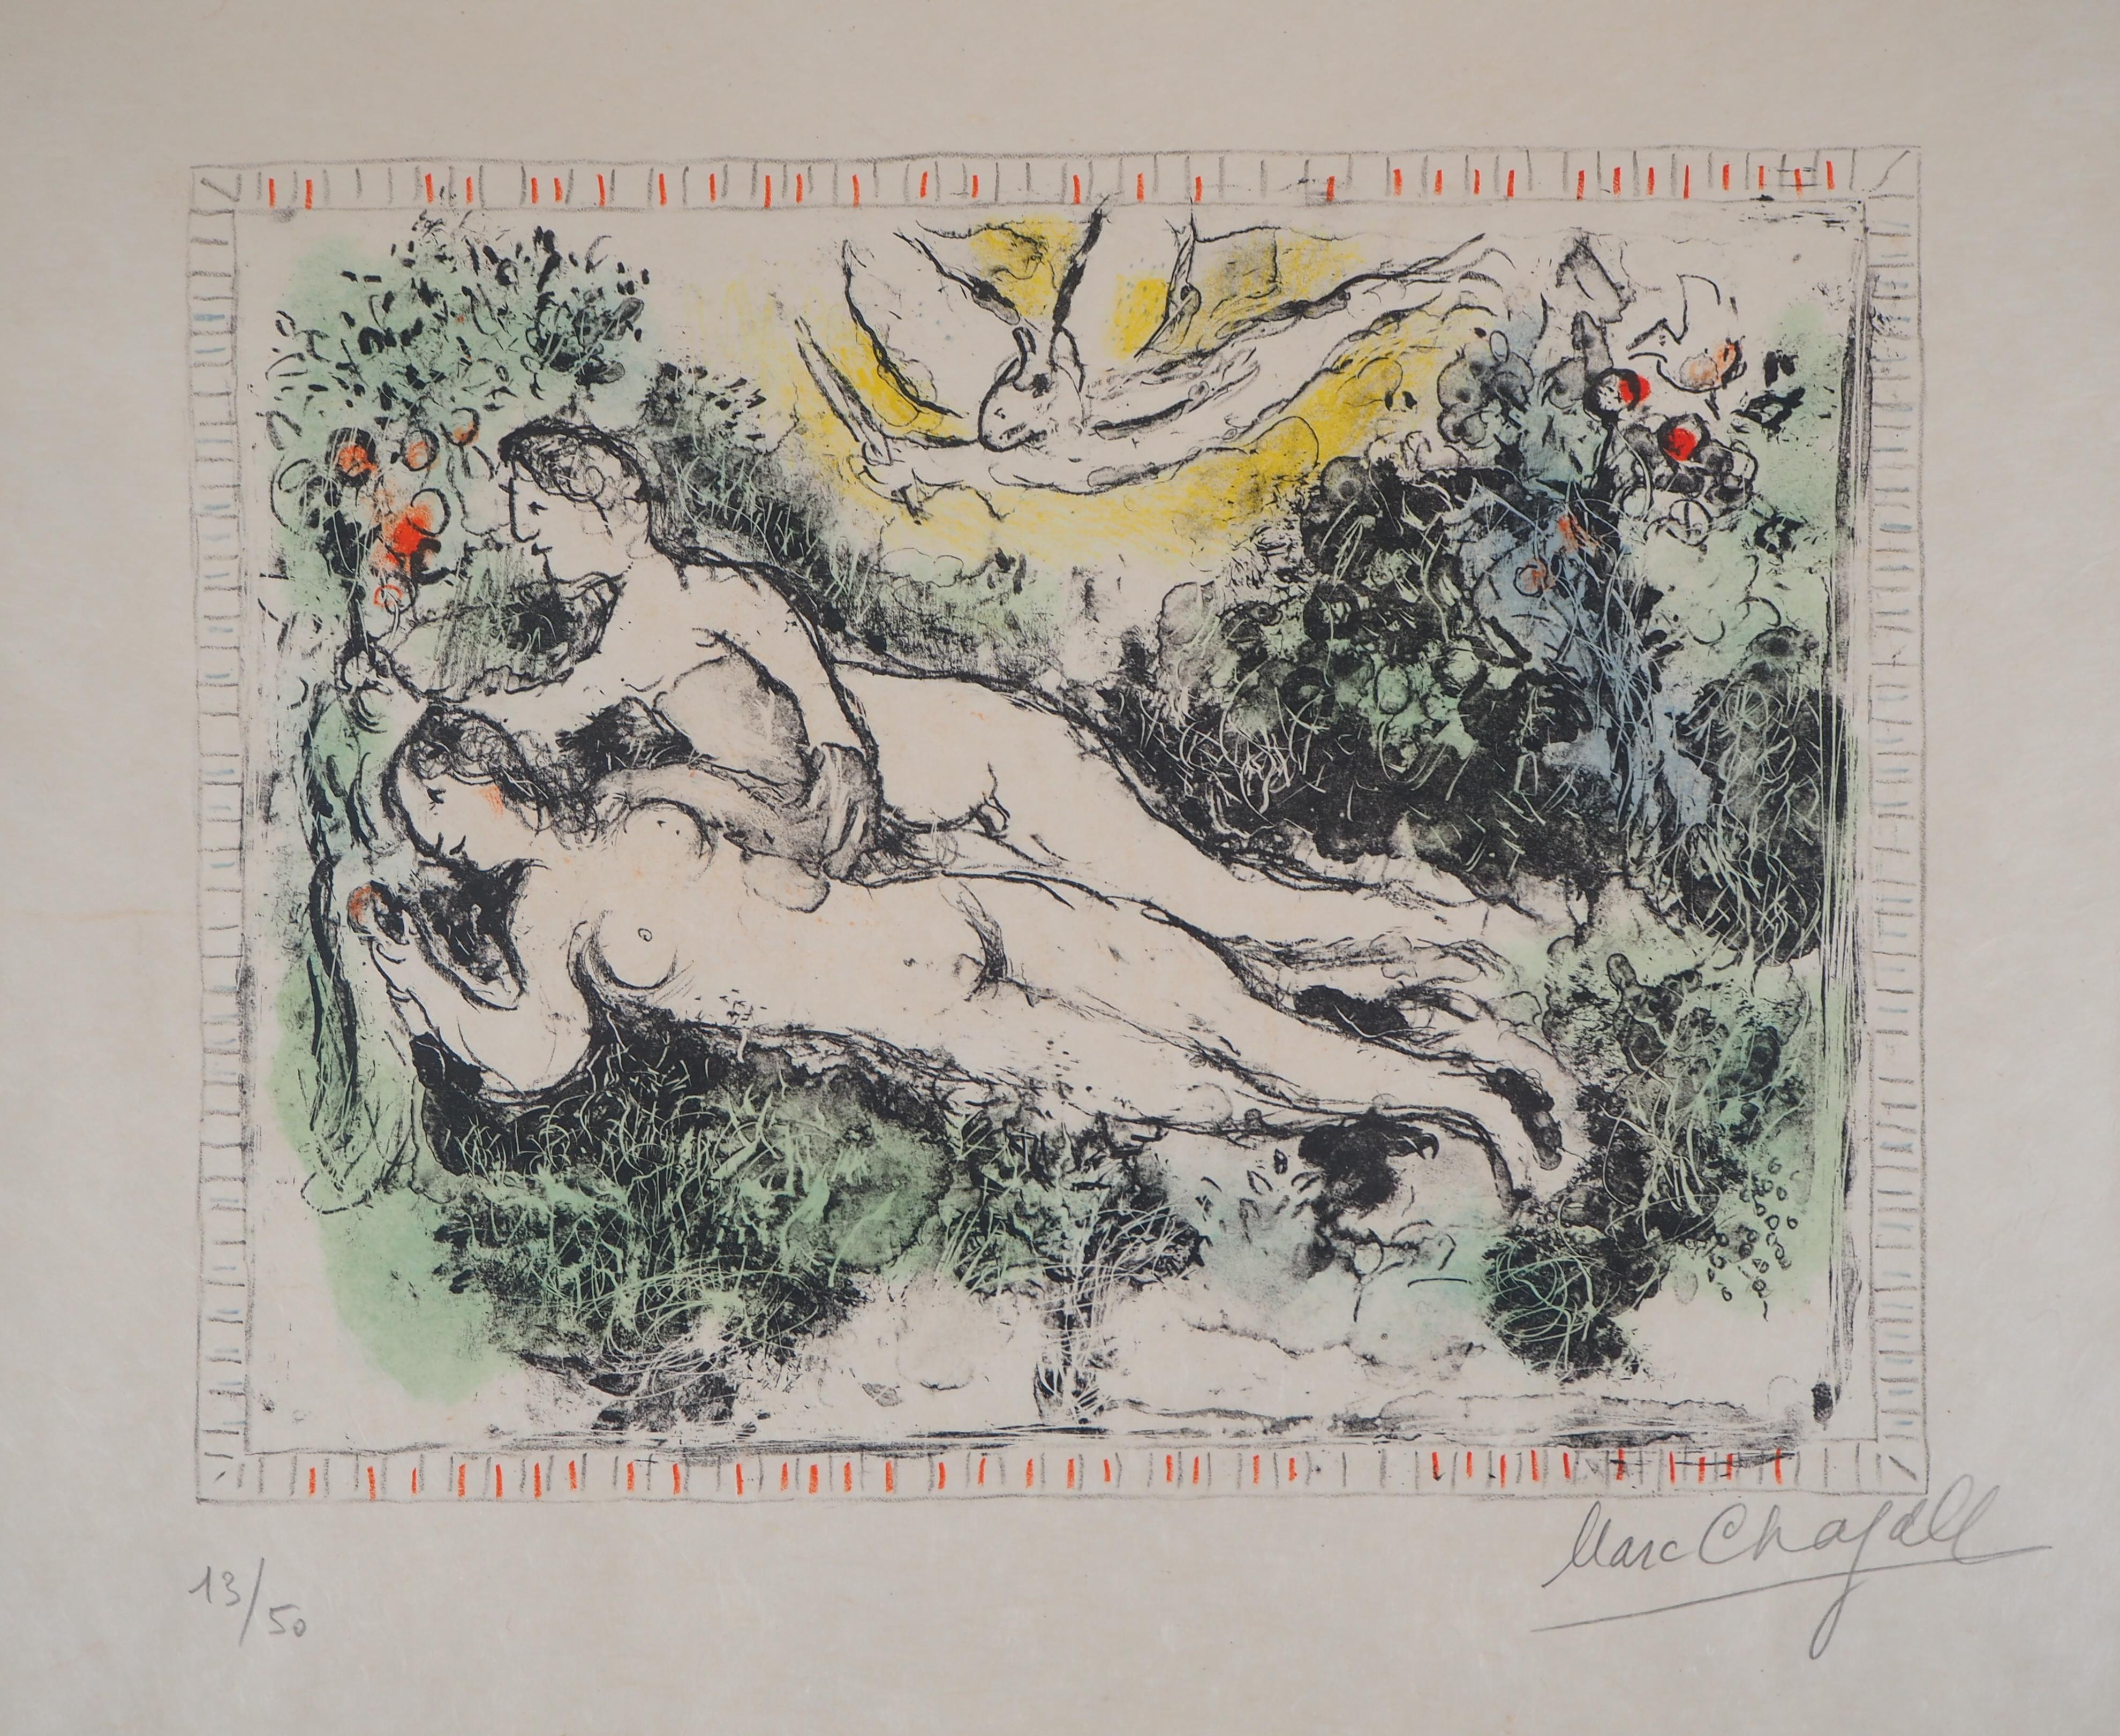 Lovers (Adam and Eve) - Original lithograph, Handsigned & Numbered /50  - Brown Figurative Print by Marc Chagall